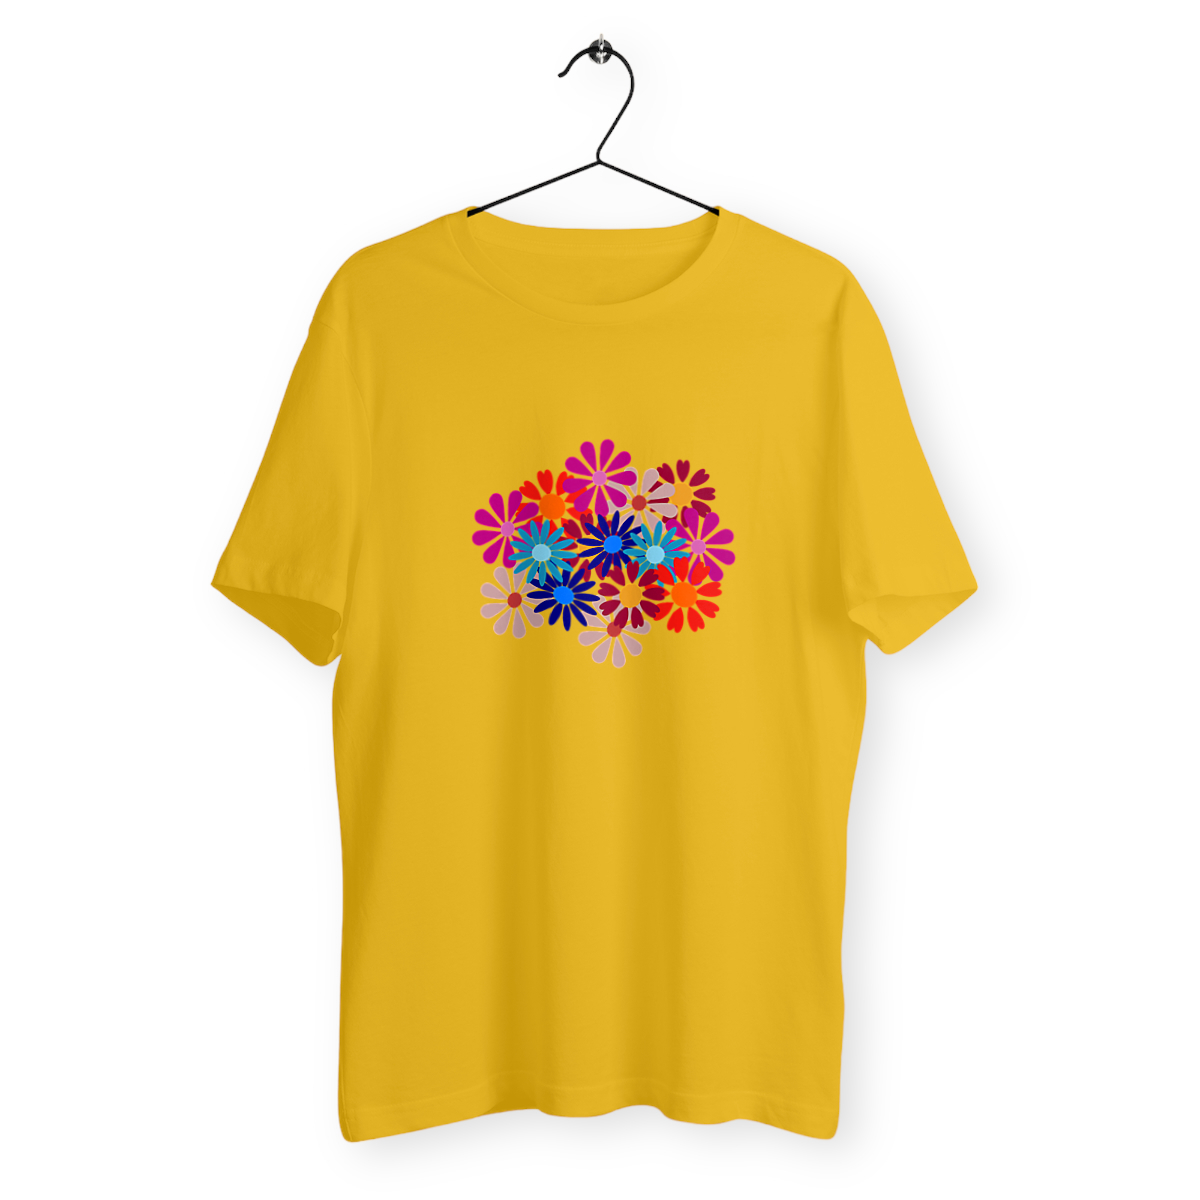 Beautiful Color Flowers on a Unisex T-Shirt